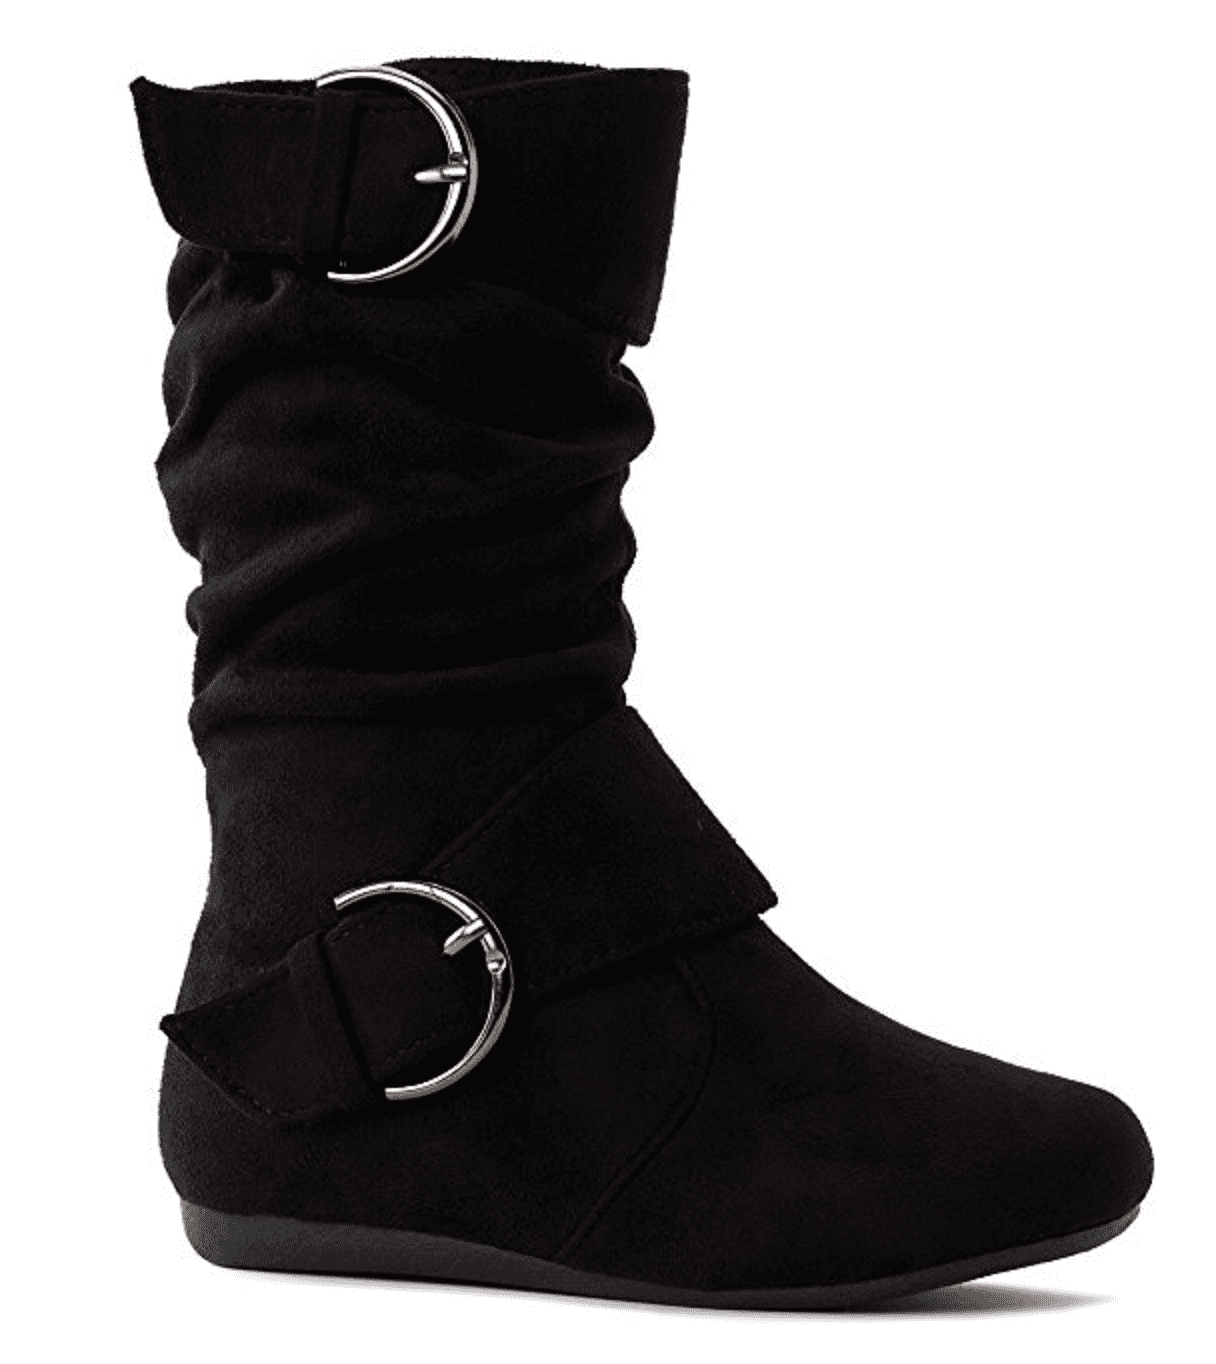 D and H - New Girls Slouch Comf Tall Midcalf Suede Winter Boots Shoes ...